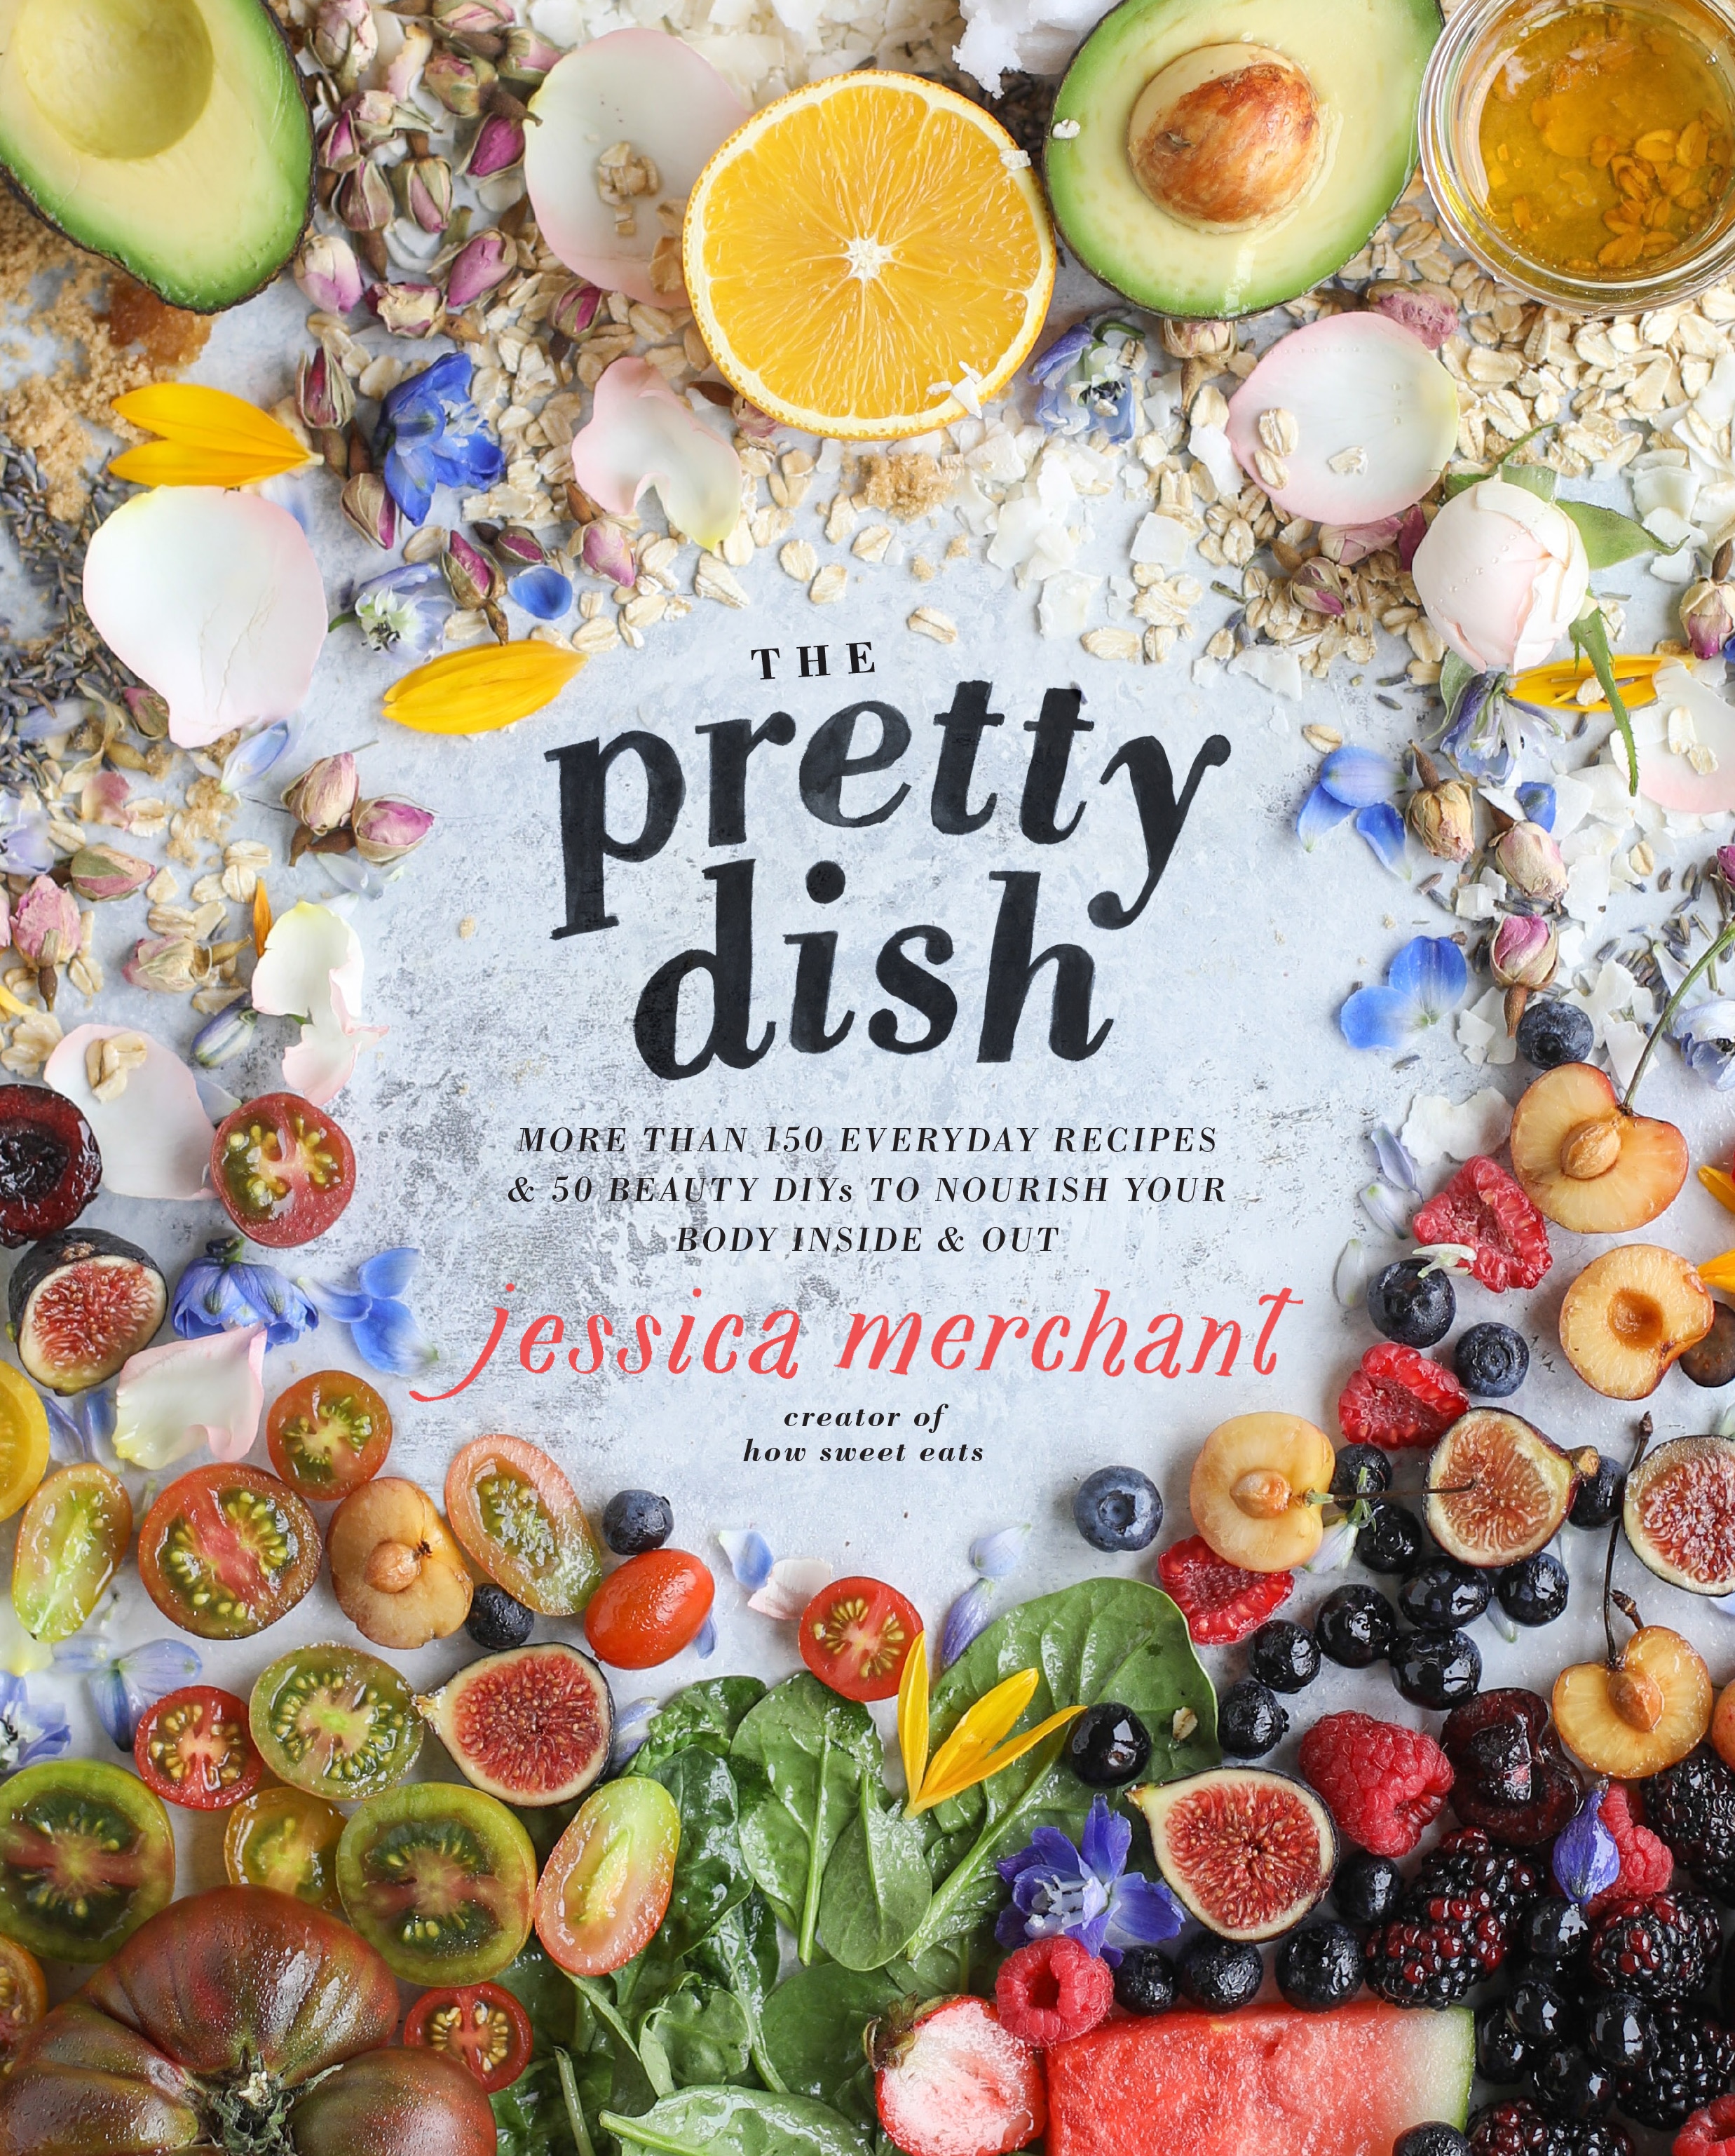 come join us for the pretty dish book club - september! I howsweeteats.com 